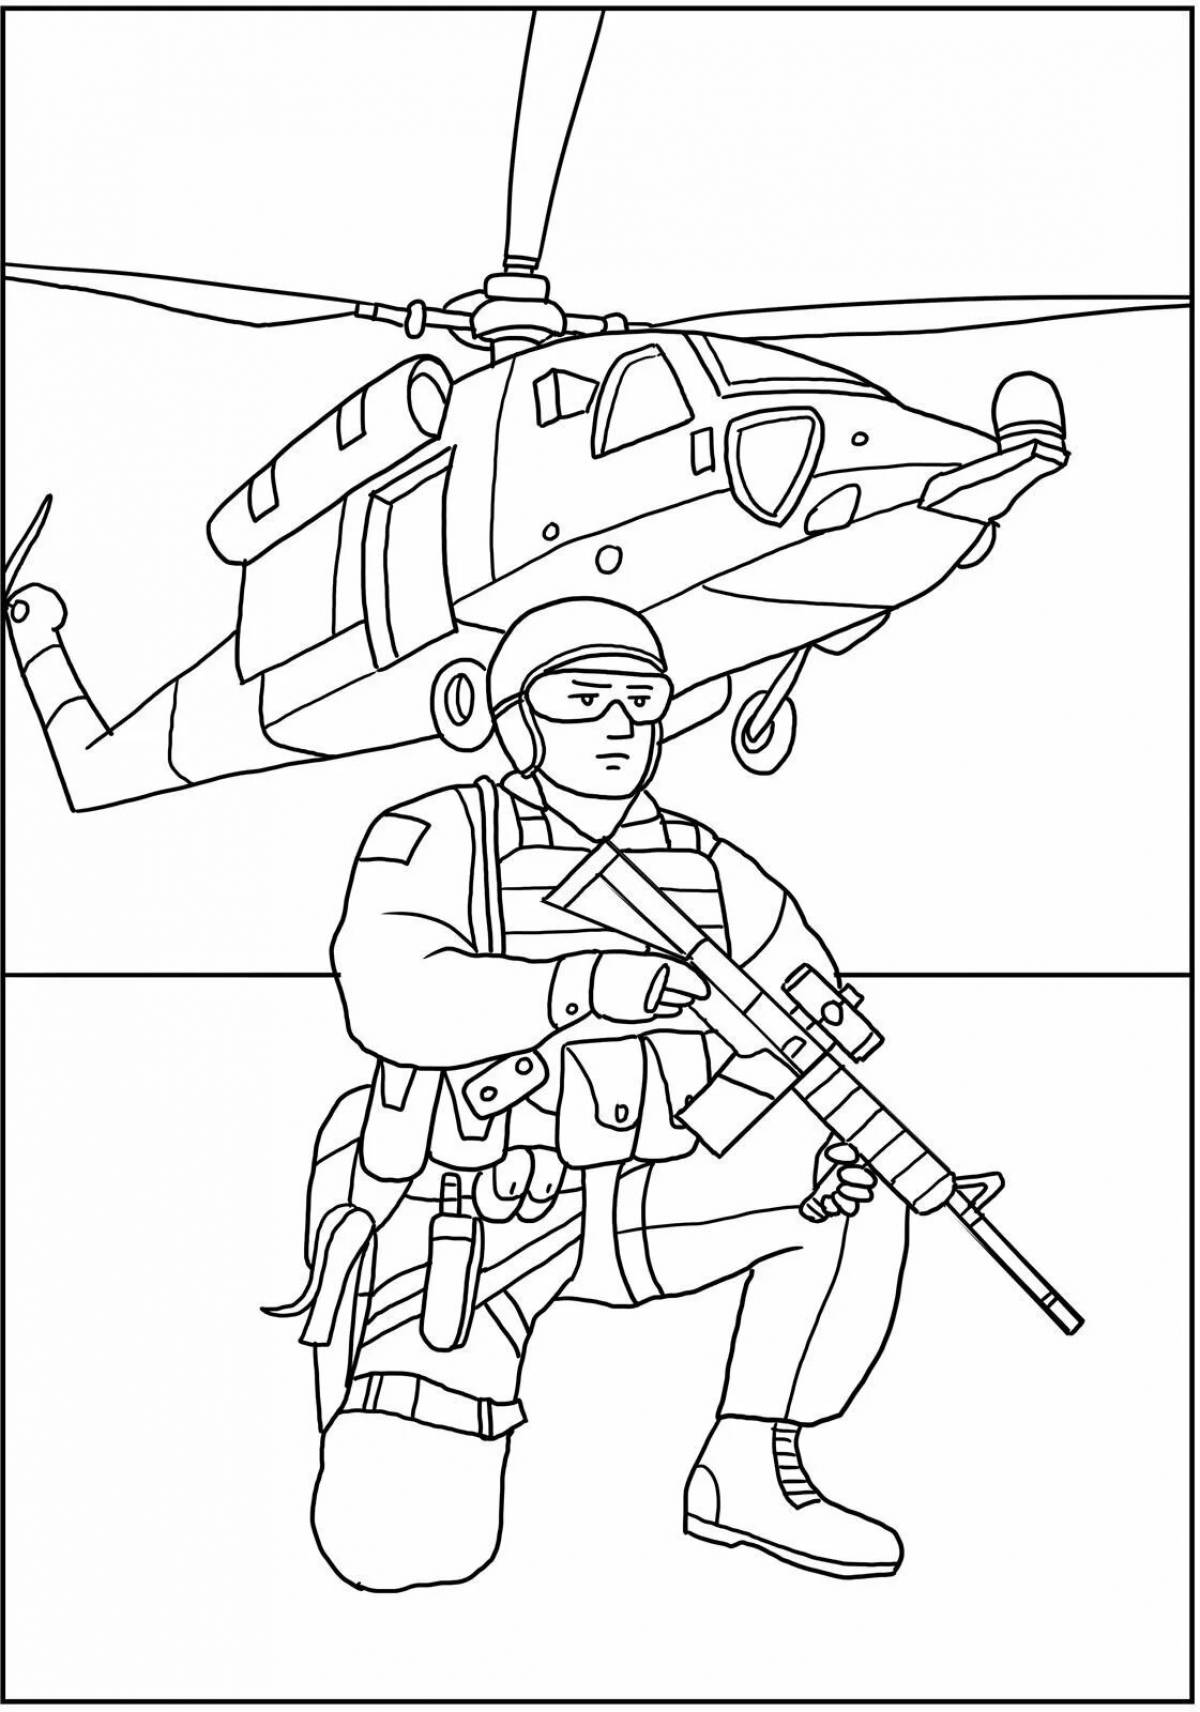 Glorious soldier hero coloring page